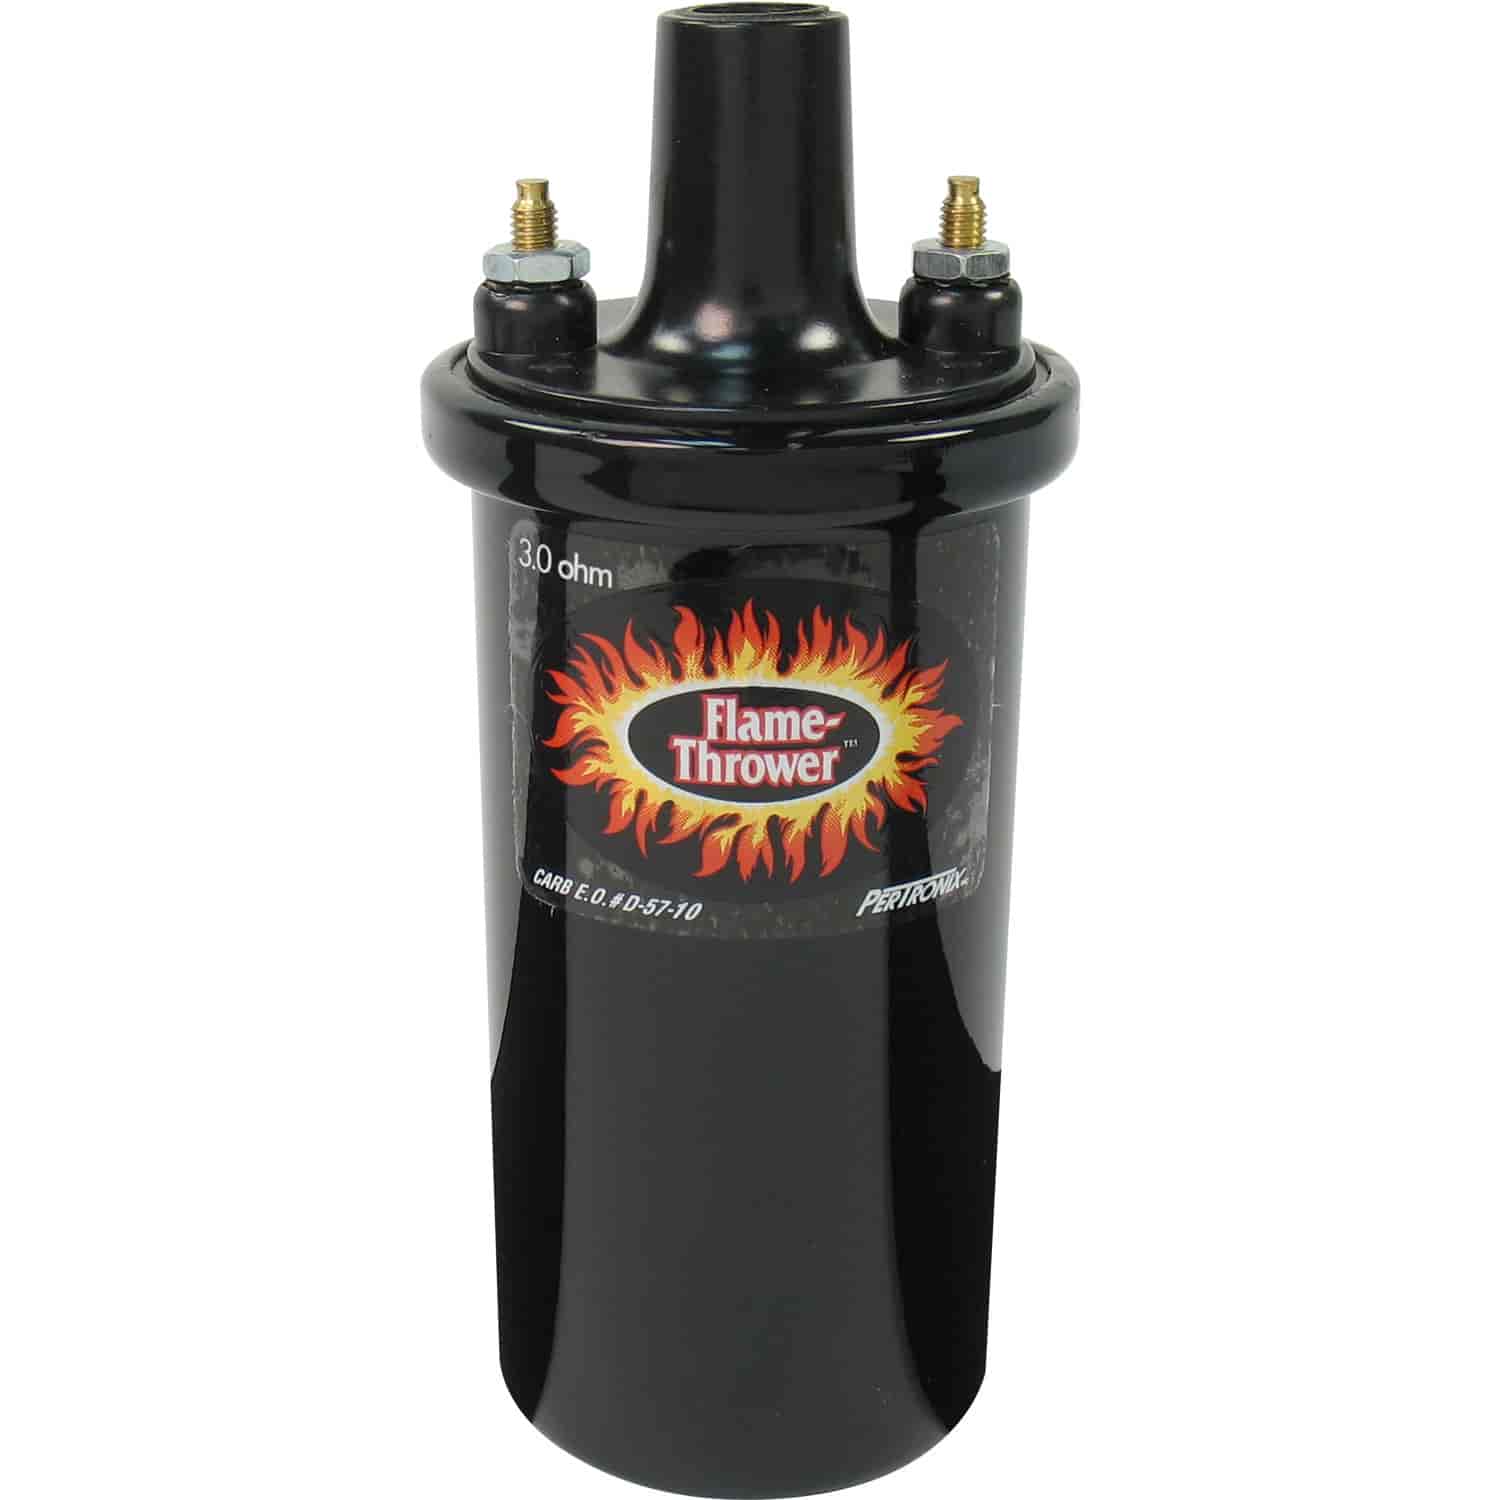 Flame-Thrower Coil Black